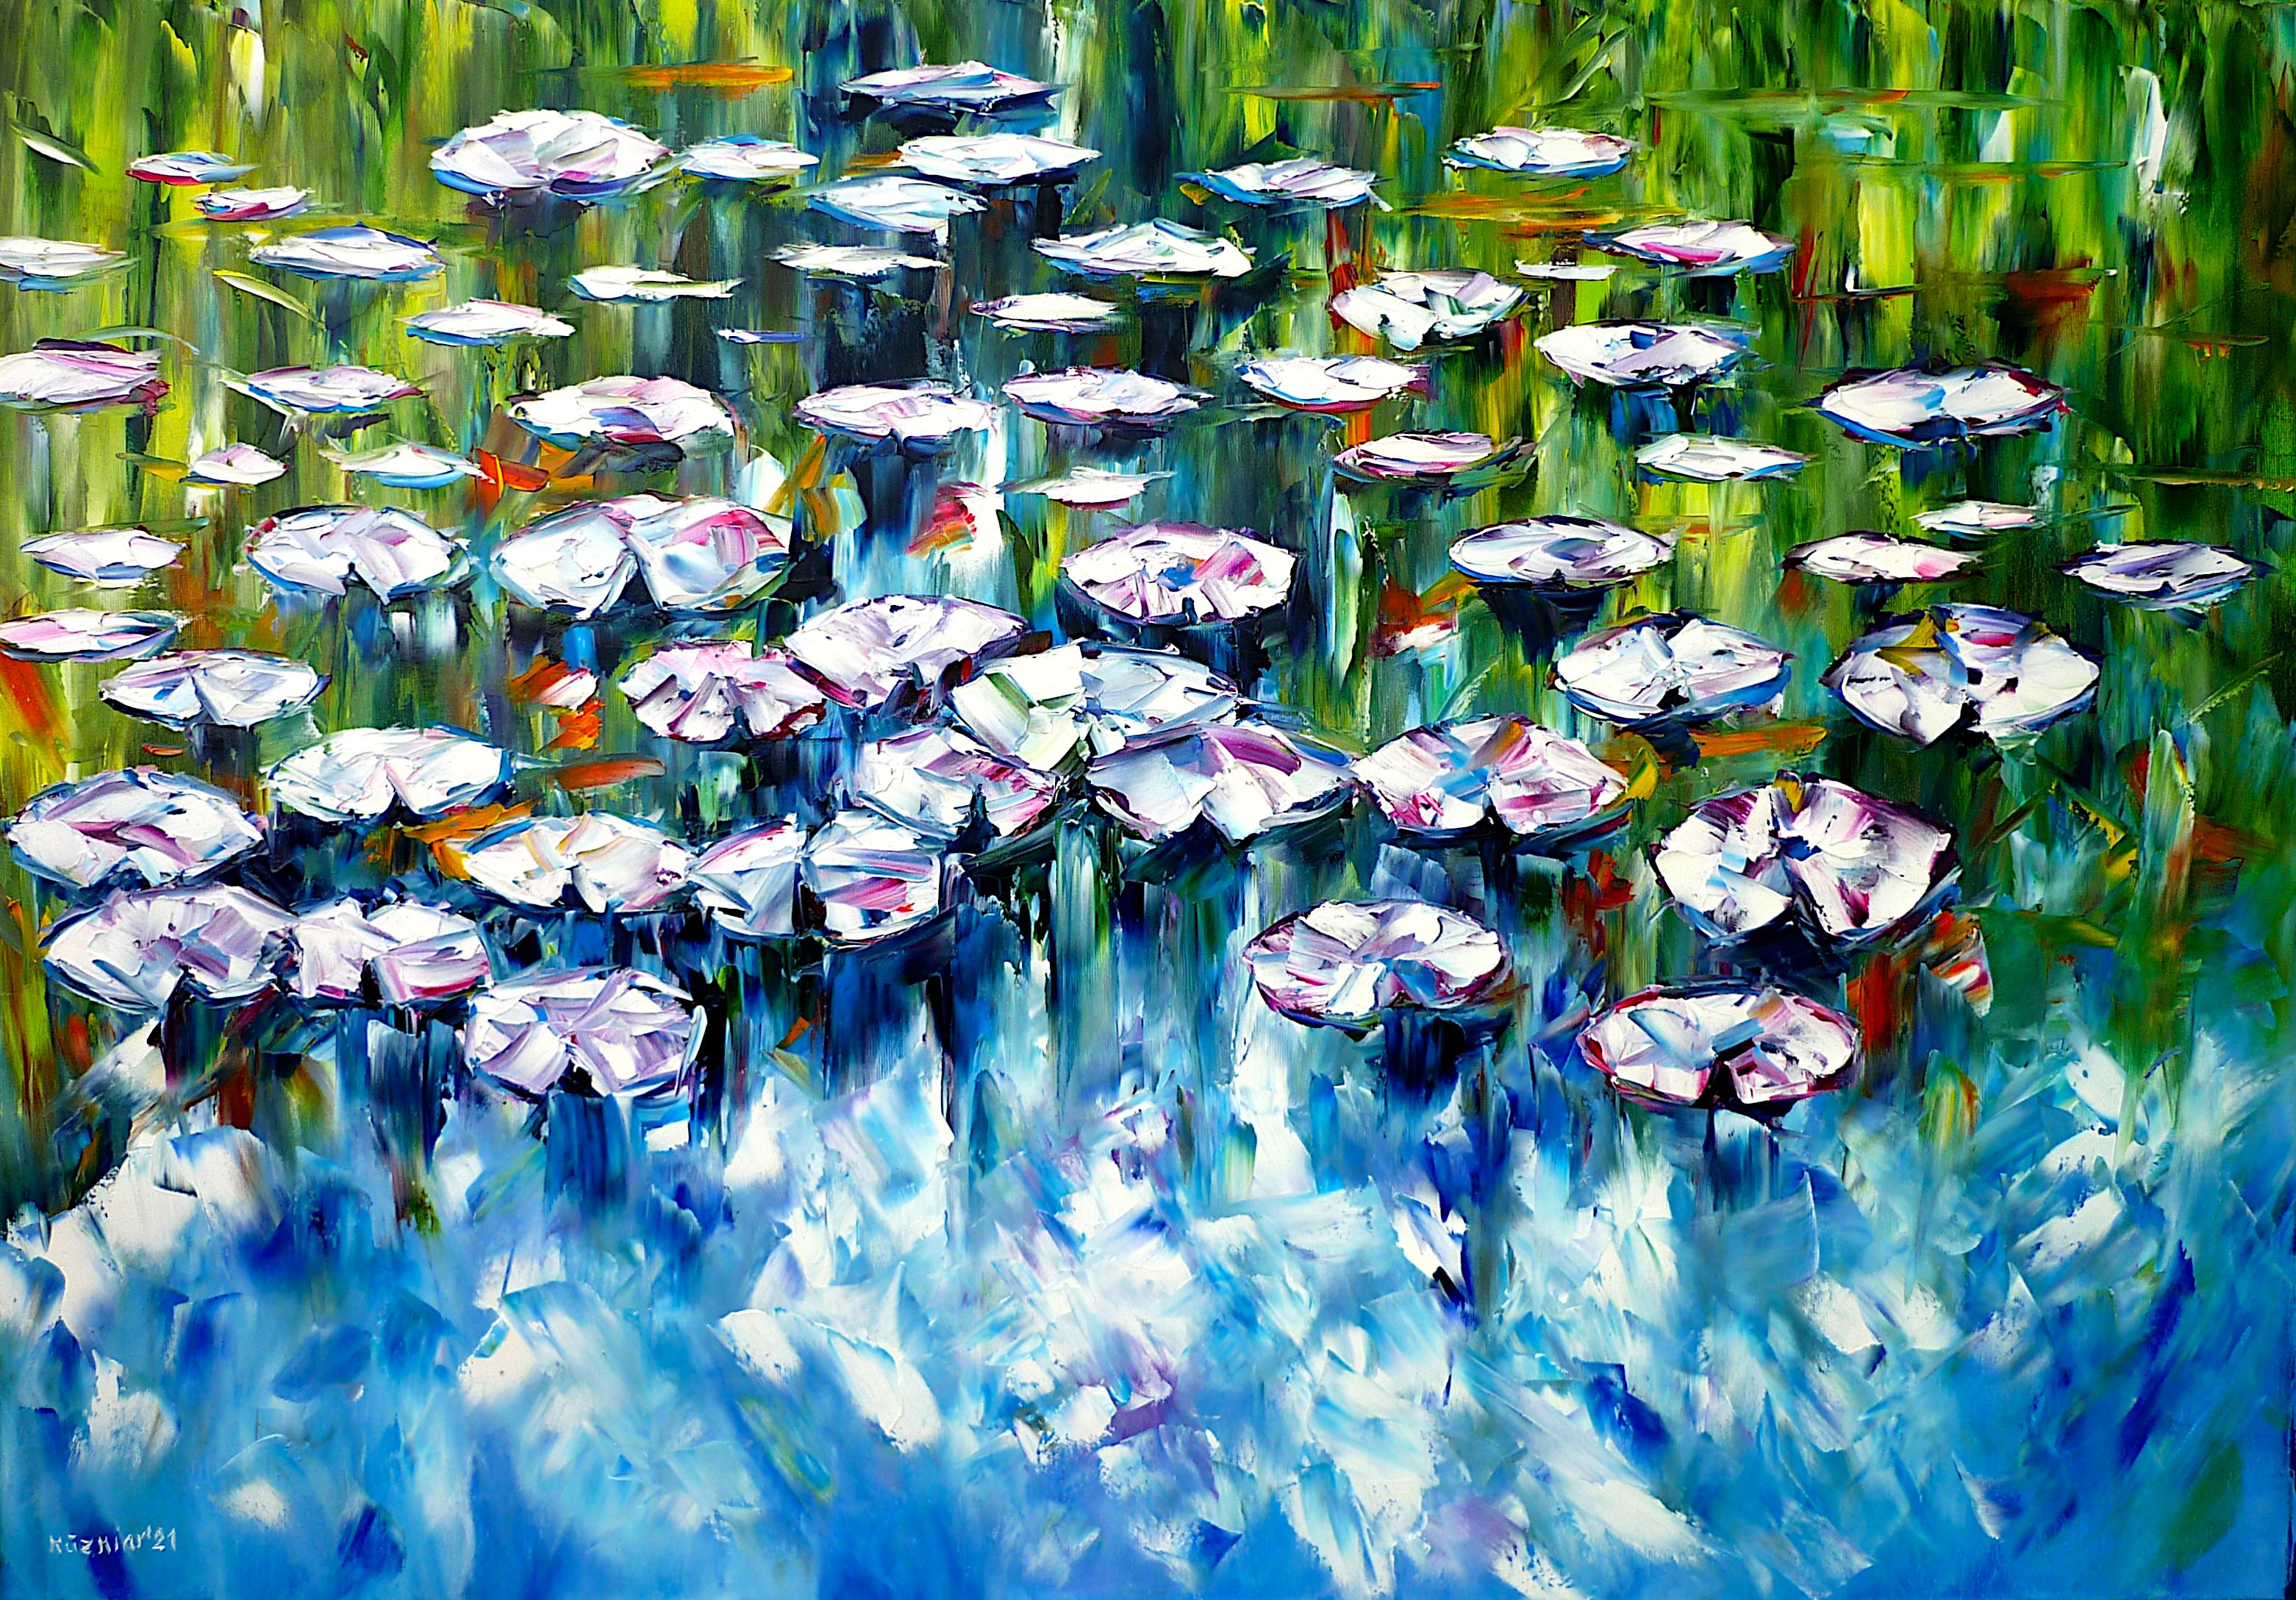 pond painting,lilies on the water,water flowers,claude monet,garden pond,pond in the garden,water lilies,lotus flowers,garden painting,rose pond,sky reflection,cloud reflections in the water,flowers in the water,flowers in the pond,flower pond,blue-green picture,blue-green painting,joy,friendly picture,friendly painting,peace,peaceful picture,peaceful painting,palette knife oil painting,modernart,impressionism,expressionism,figurative,abstract painting,lively colours,colorful painting,bright colors,light reflections,impasto painting,living room art,living room picture,living room painting